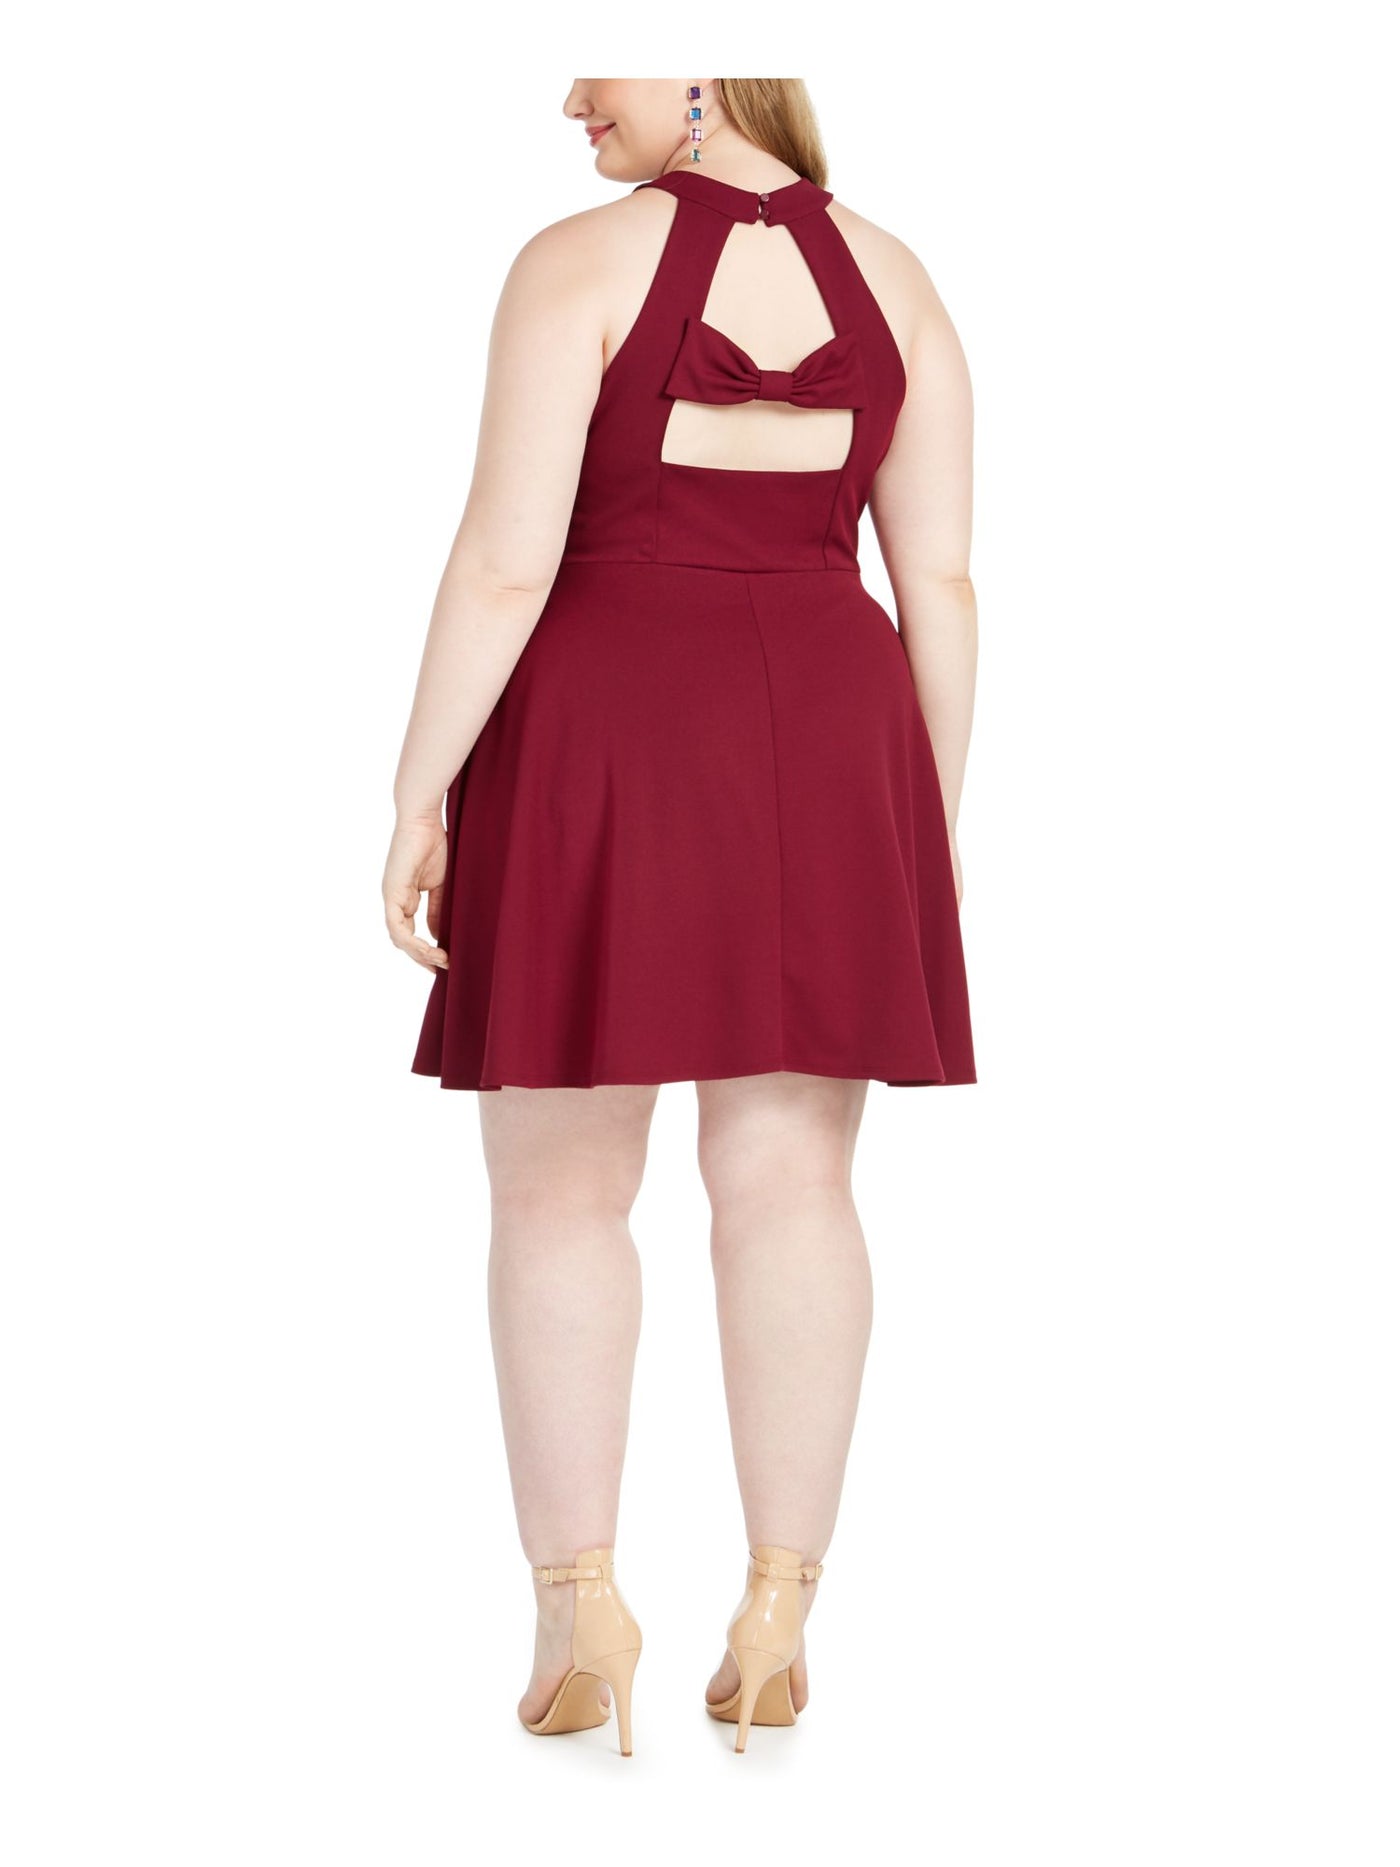 SPEECHLESS Womens Burgundy Cut Out Bowtie Sleeveless Halter Above The Knee Fit + Flare Dress 24